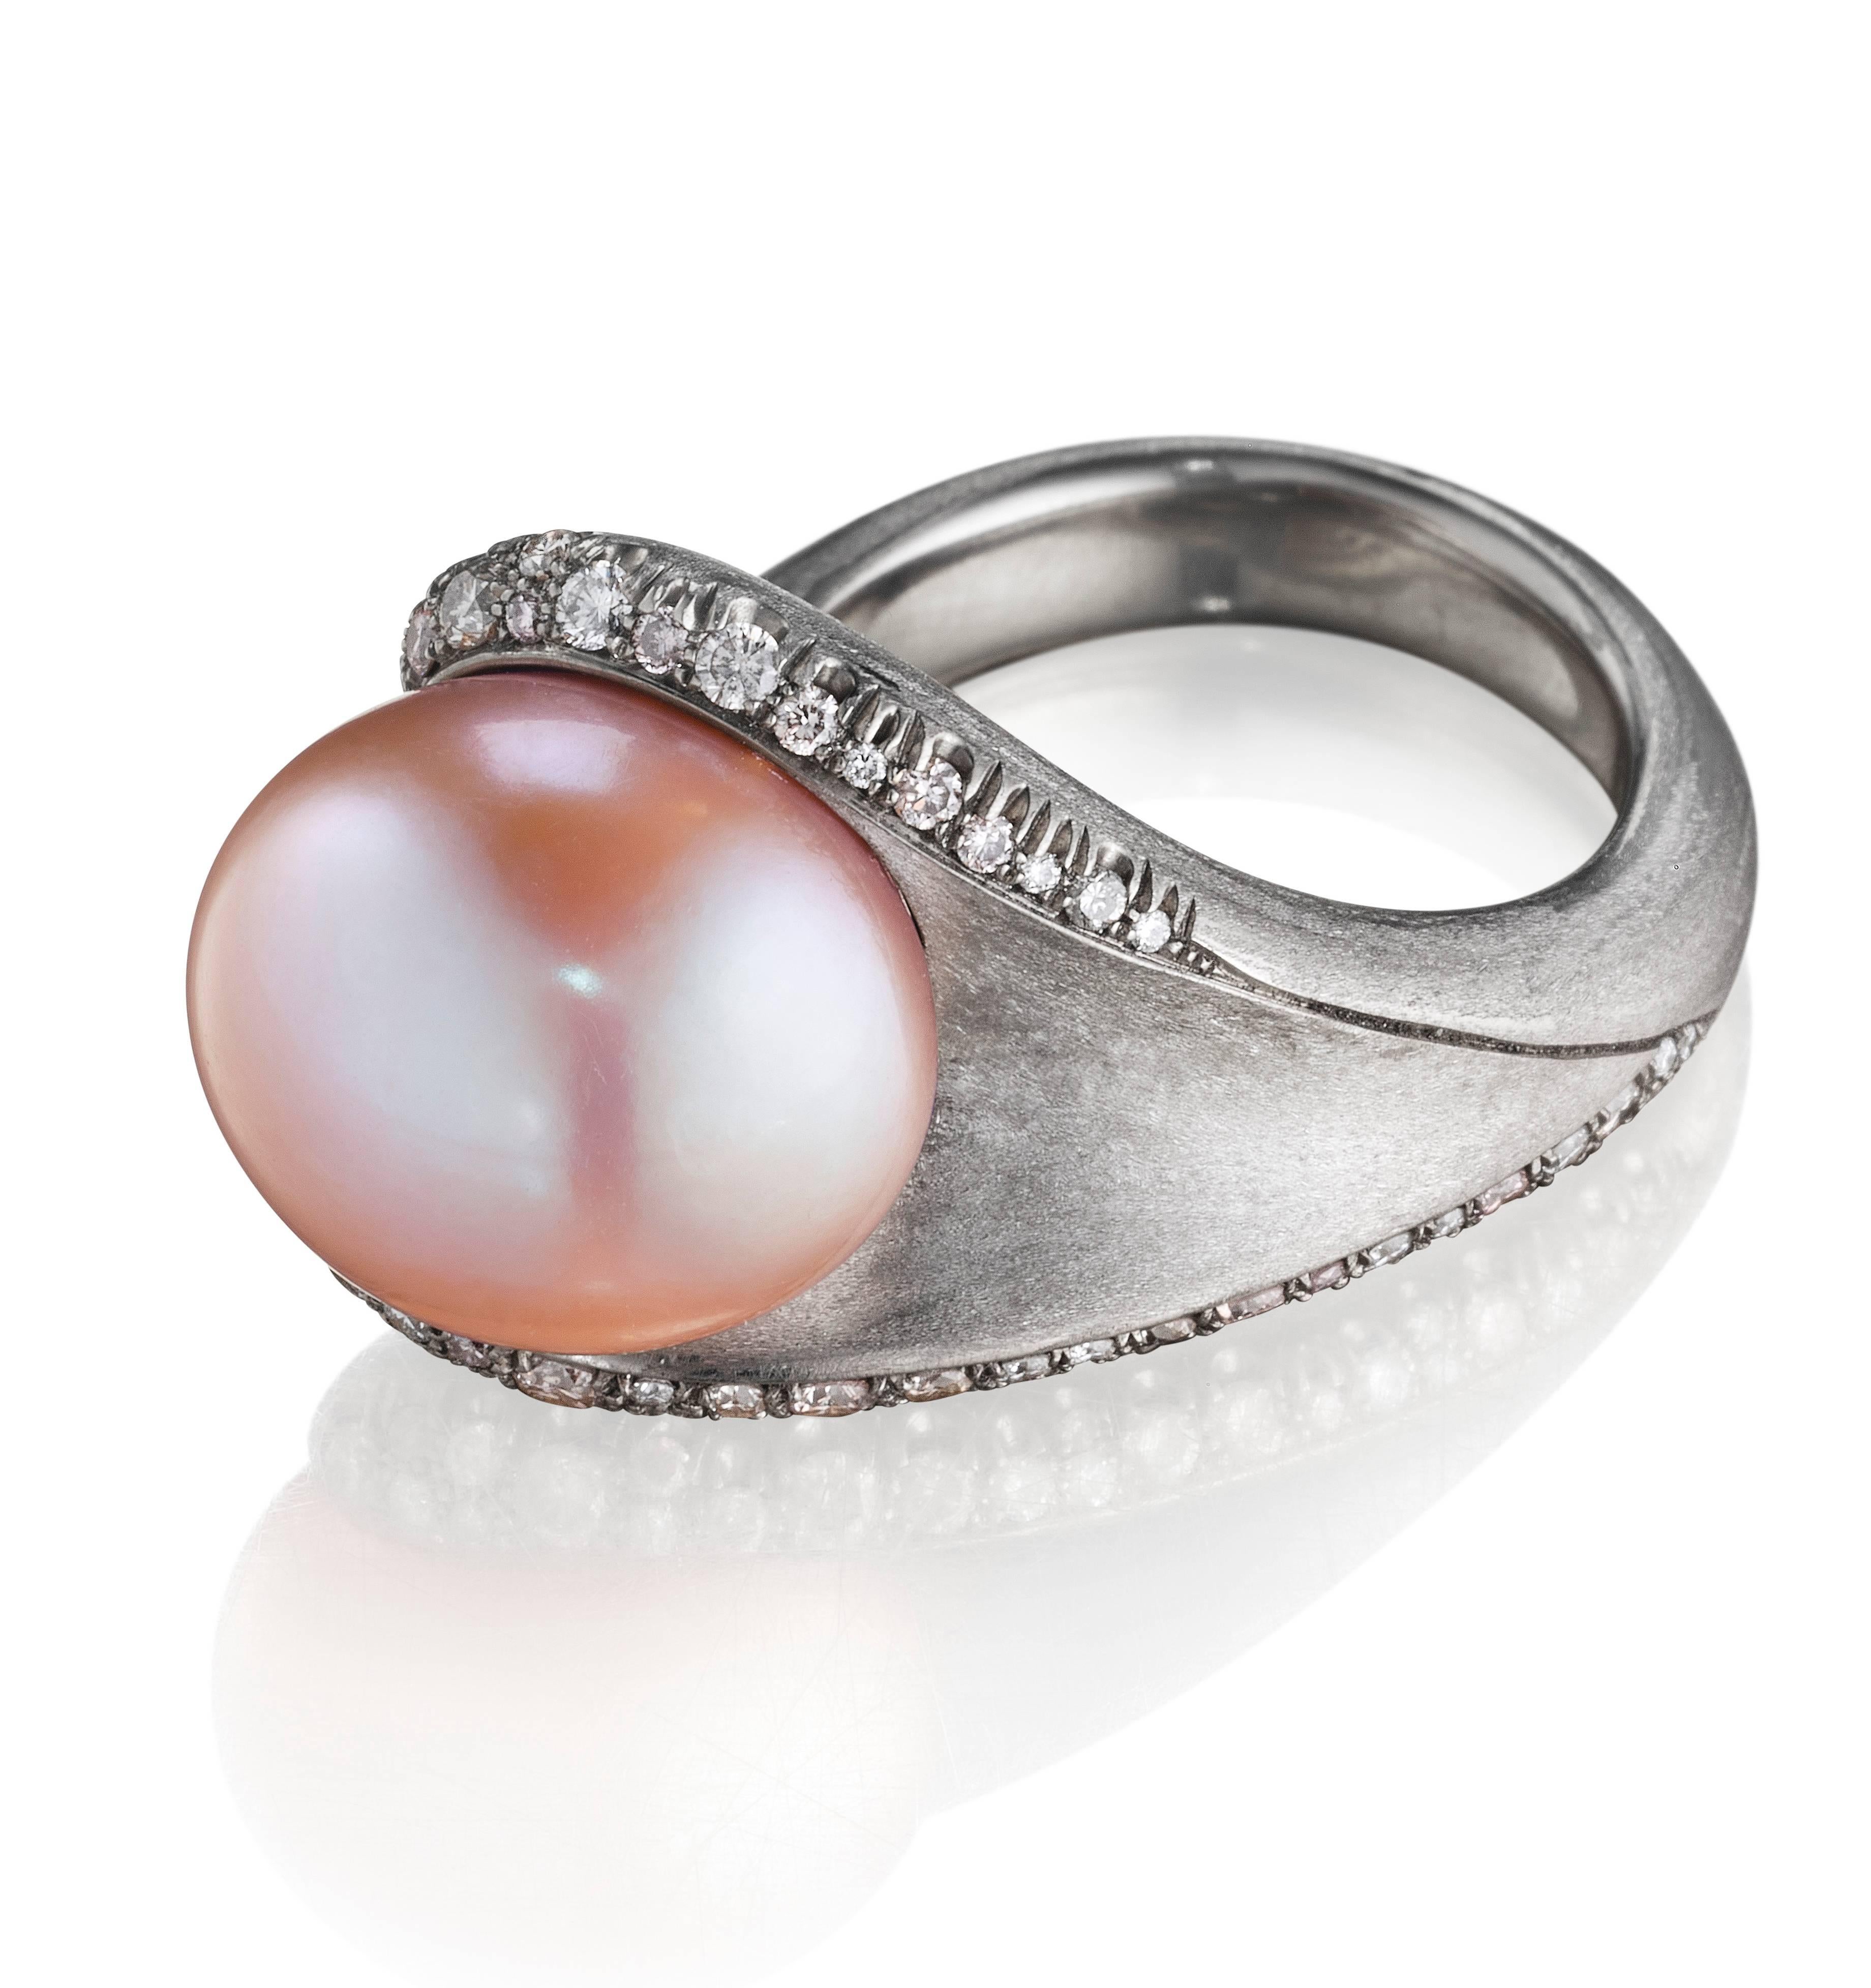 This elegant hand-crafted ring features a an exceptionally beautiful 15.5 ct pale pink freshwater pearl set in 18K natural palladium white gold with an assortment of VS-FG white diamonds and pink diamonds. Like all rings from Naomi Sarna, this is an